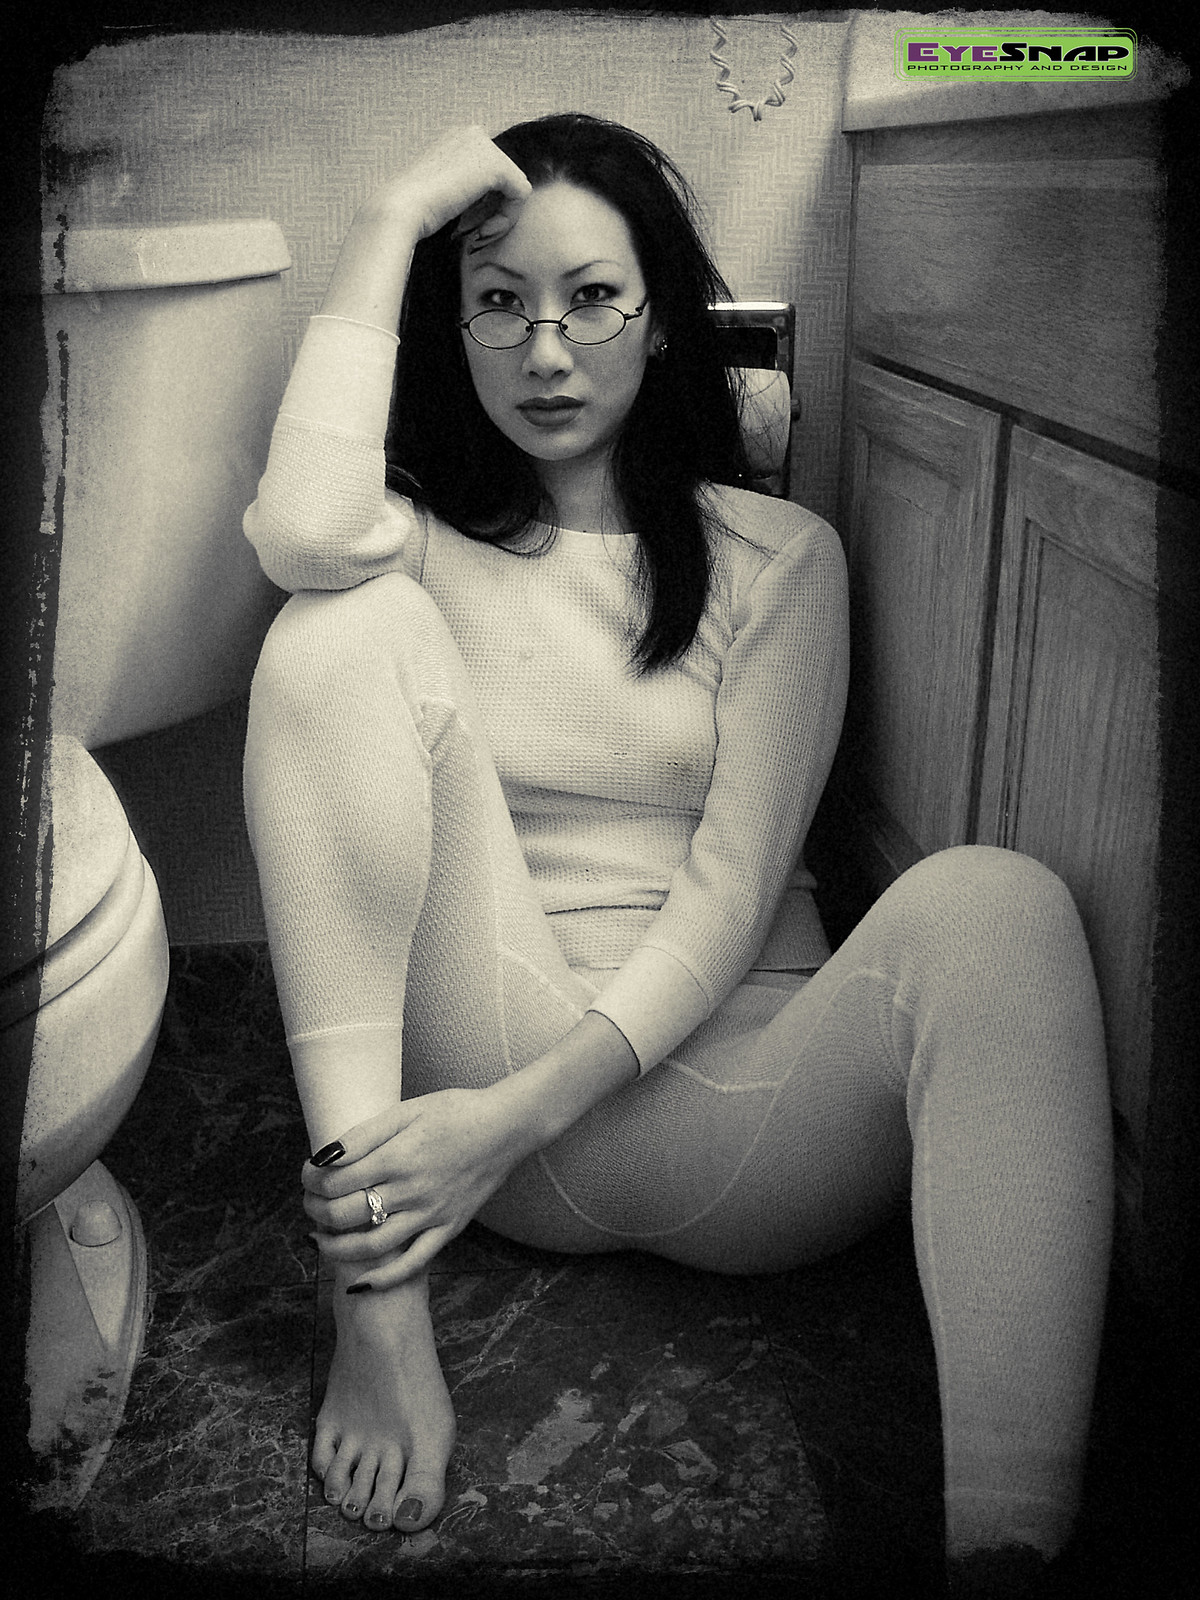 showing images for tight lips that grip xxx #glasses  #cf  #nonnude  #eyecontact  #asian  #seethrutop  #bathroom